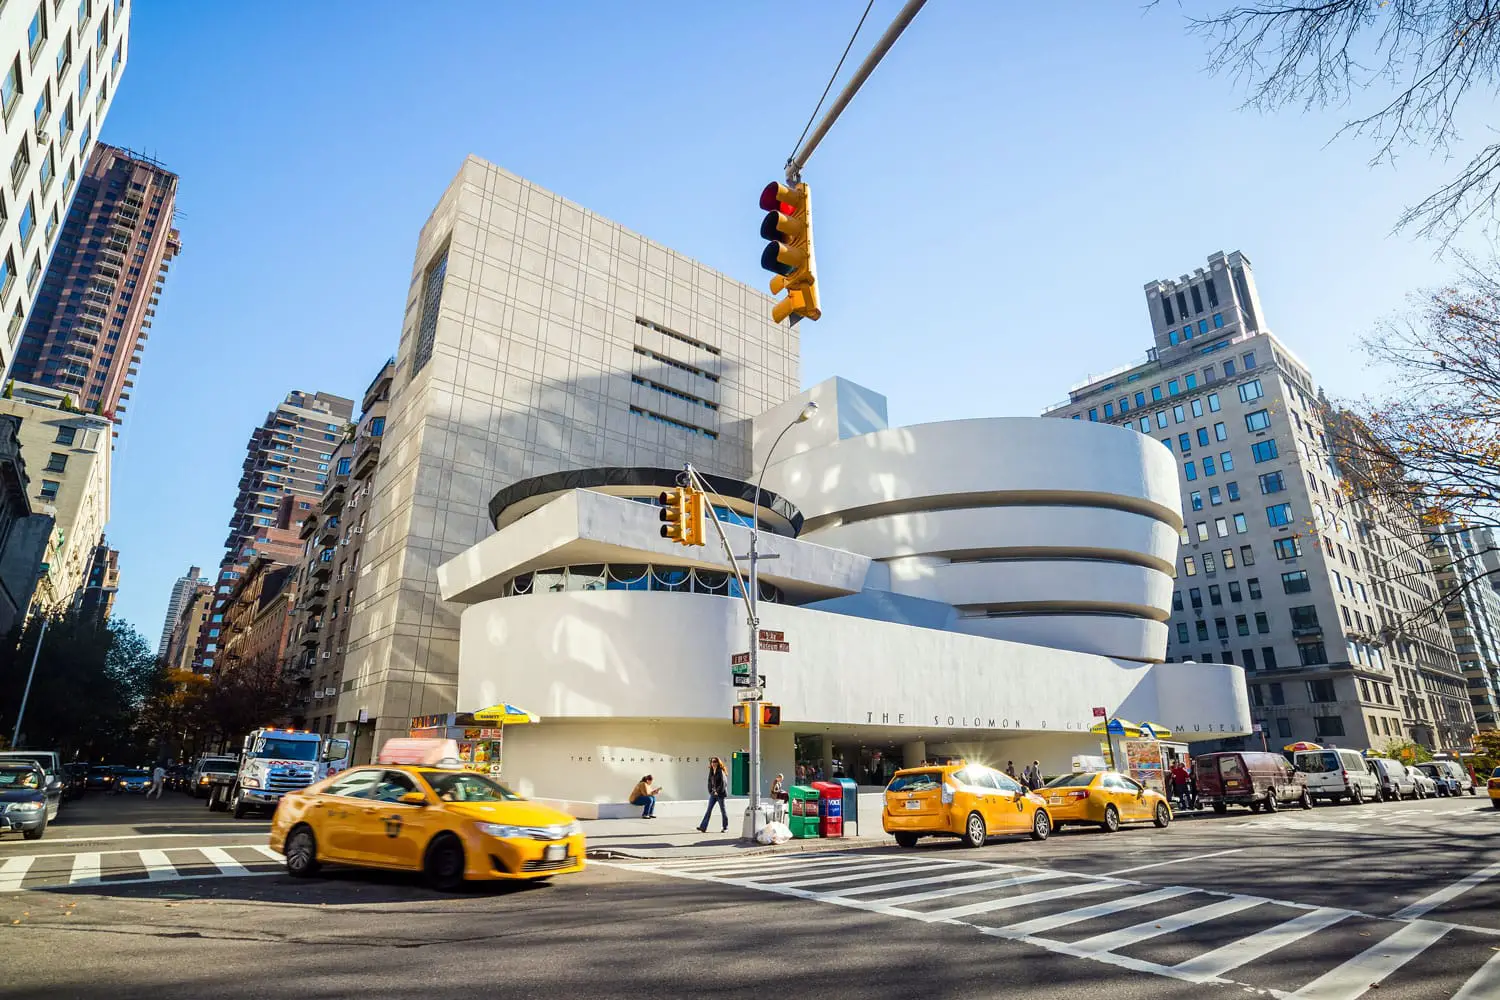 The Solomon R. Guggenheim Museum of modern and contemporary art in New York City